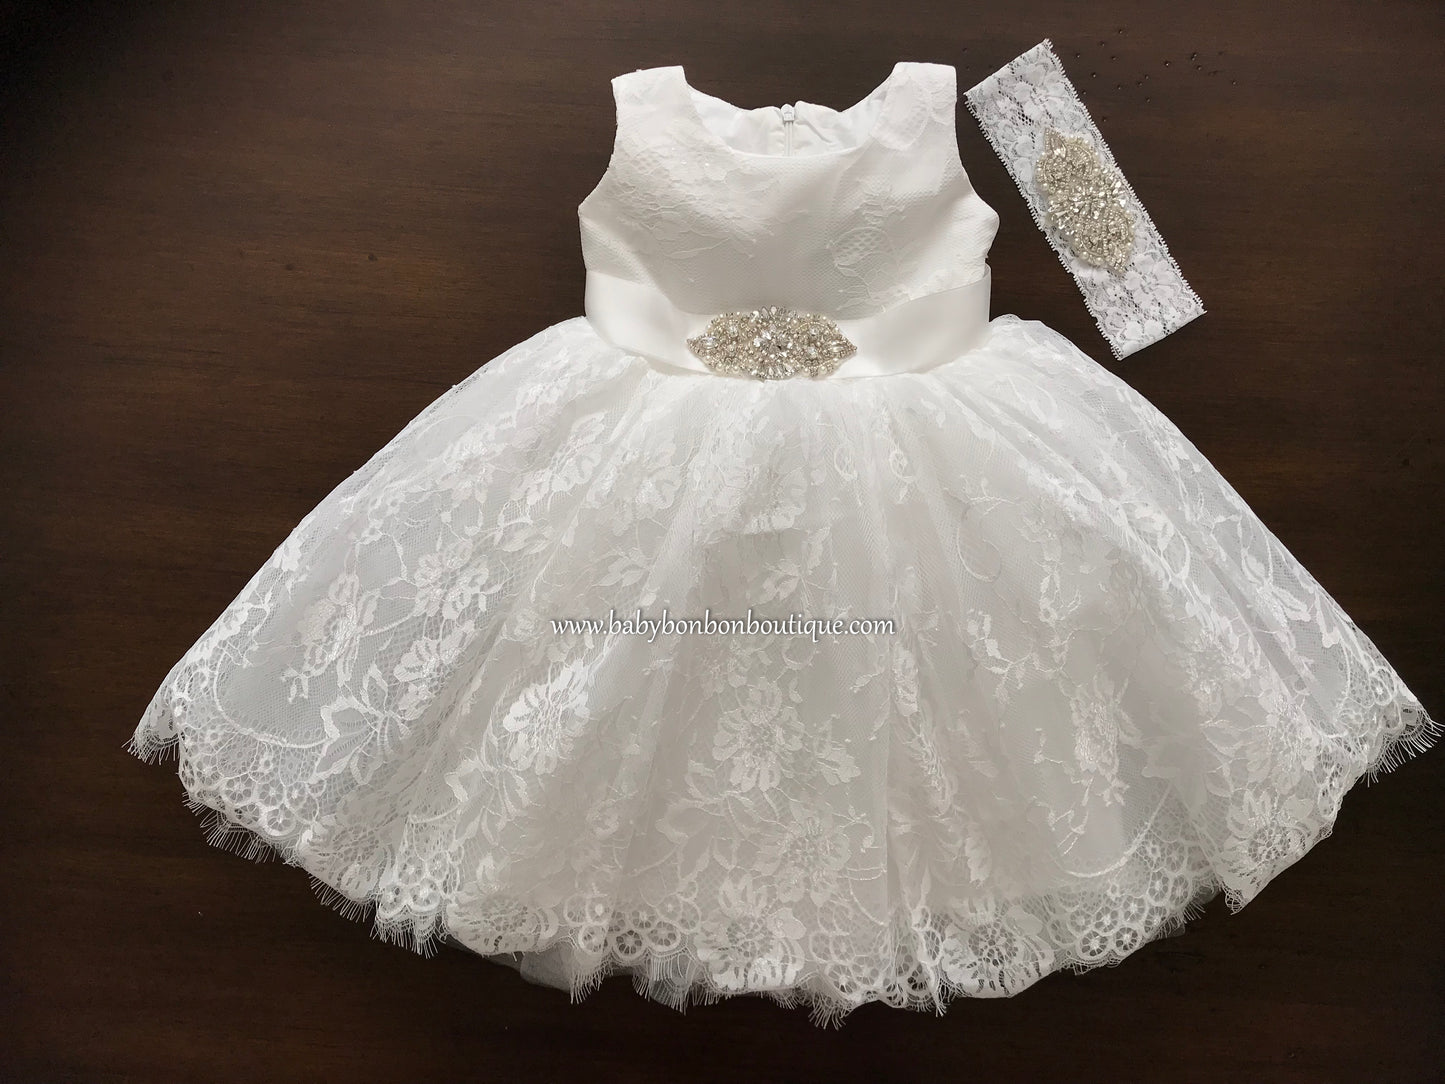 Baby Lace Christening Dress with Rhinestones